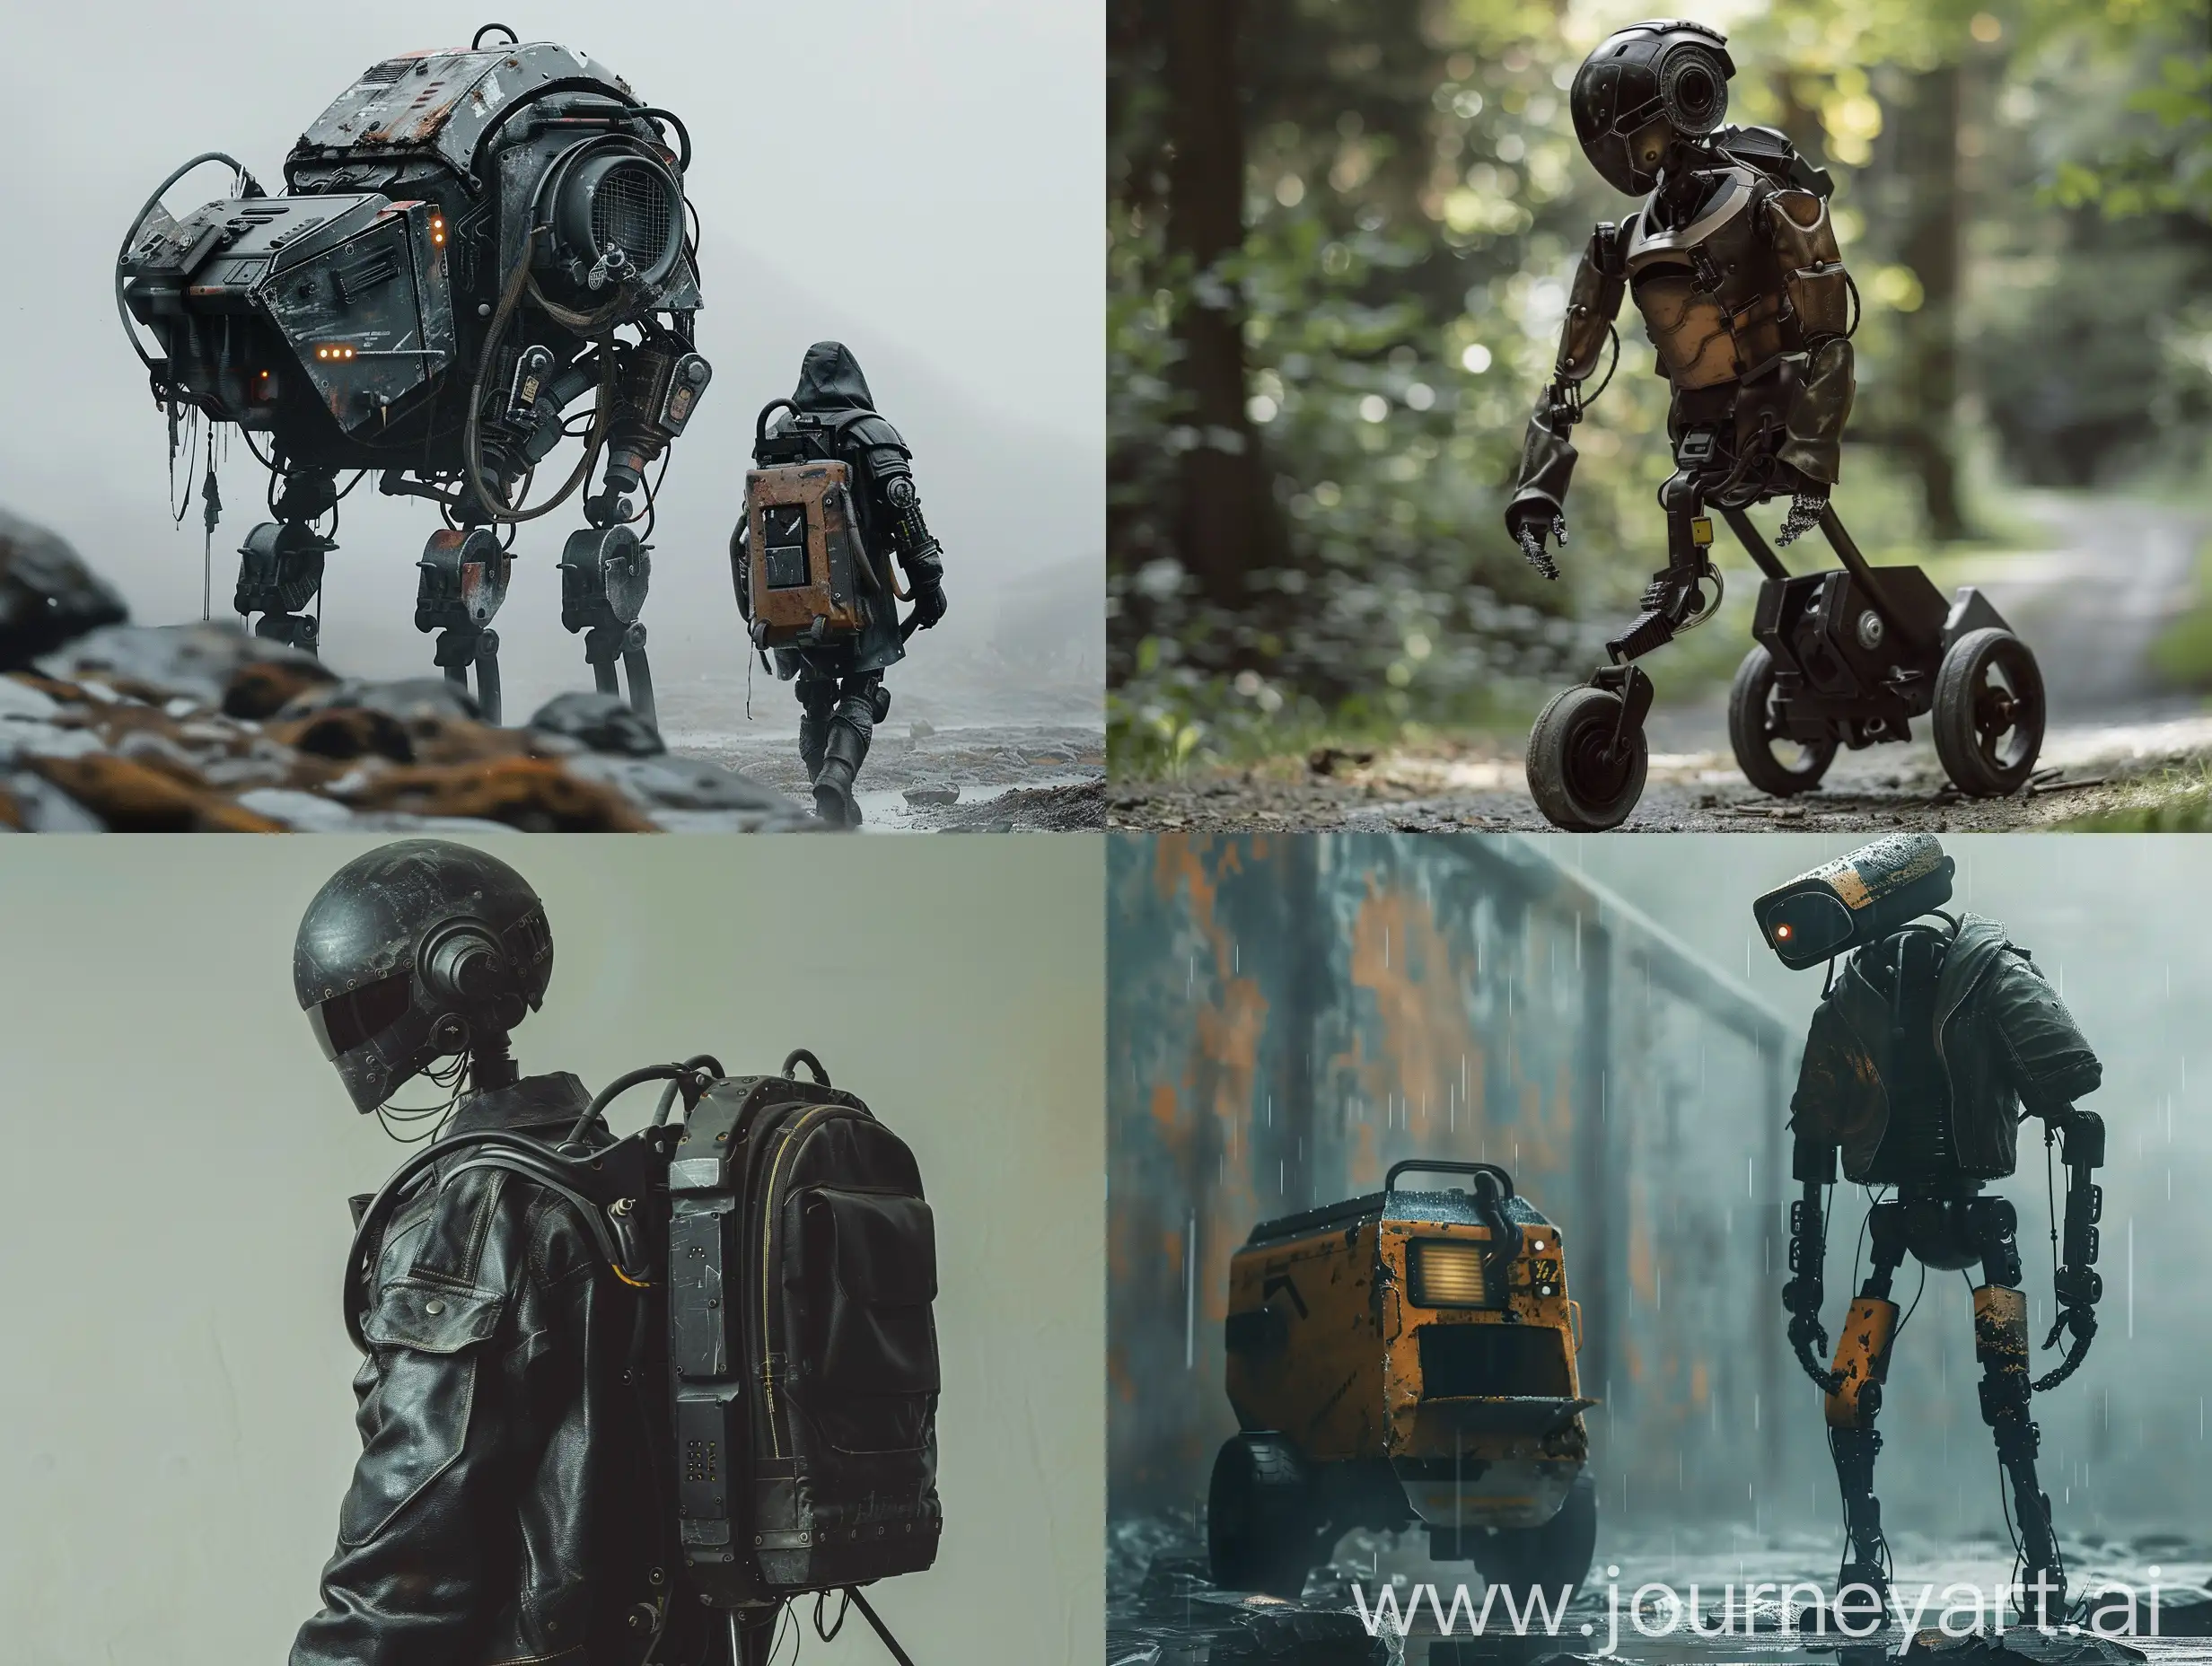 Robot-in-Leather-Jacket-Walking-with-Mechanical-Walker-Cabin